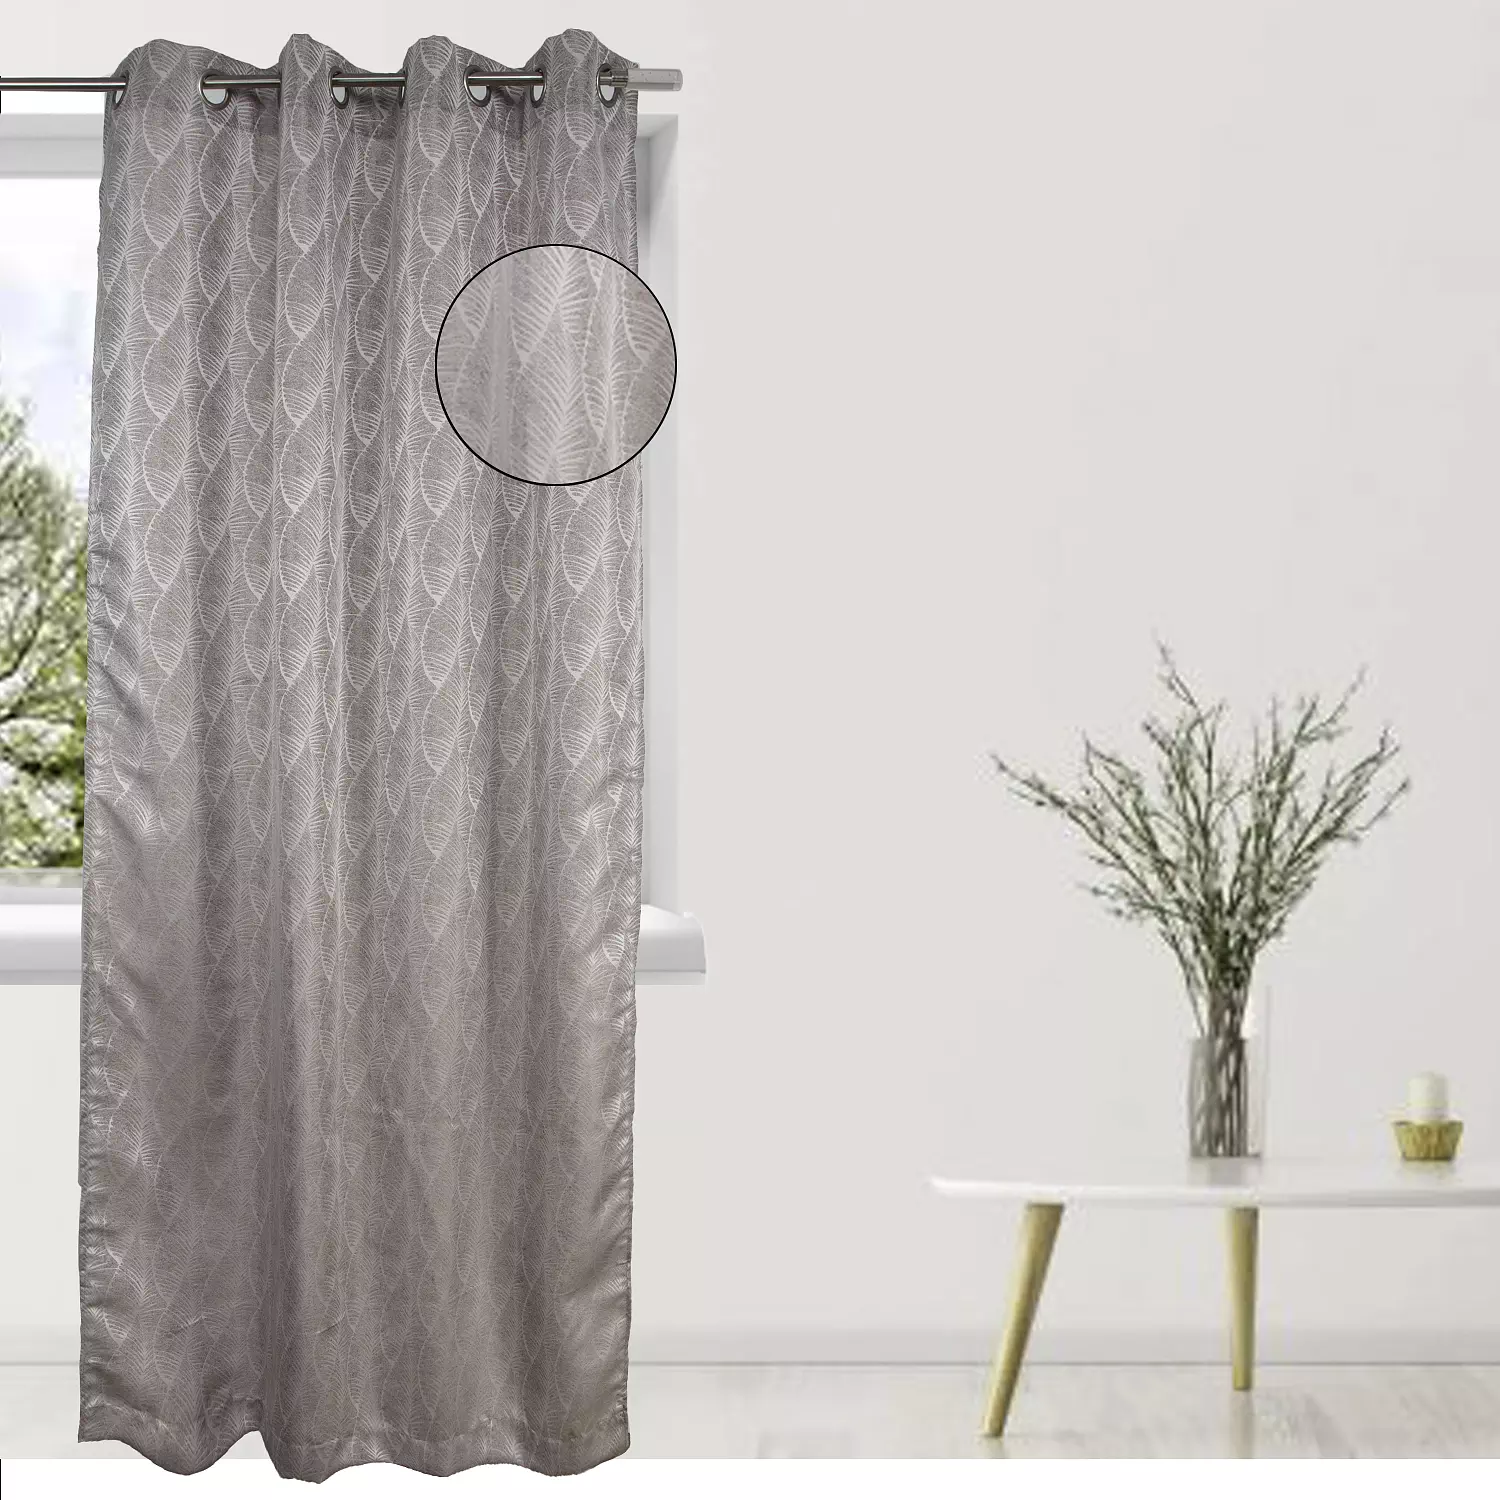 Amberly, jacquard curtain with metal grommets, 54"x84", sand